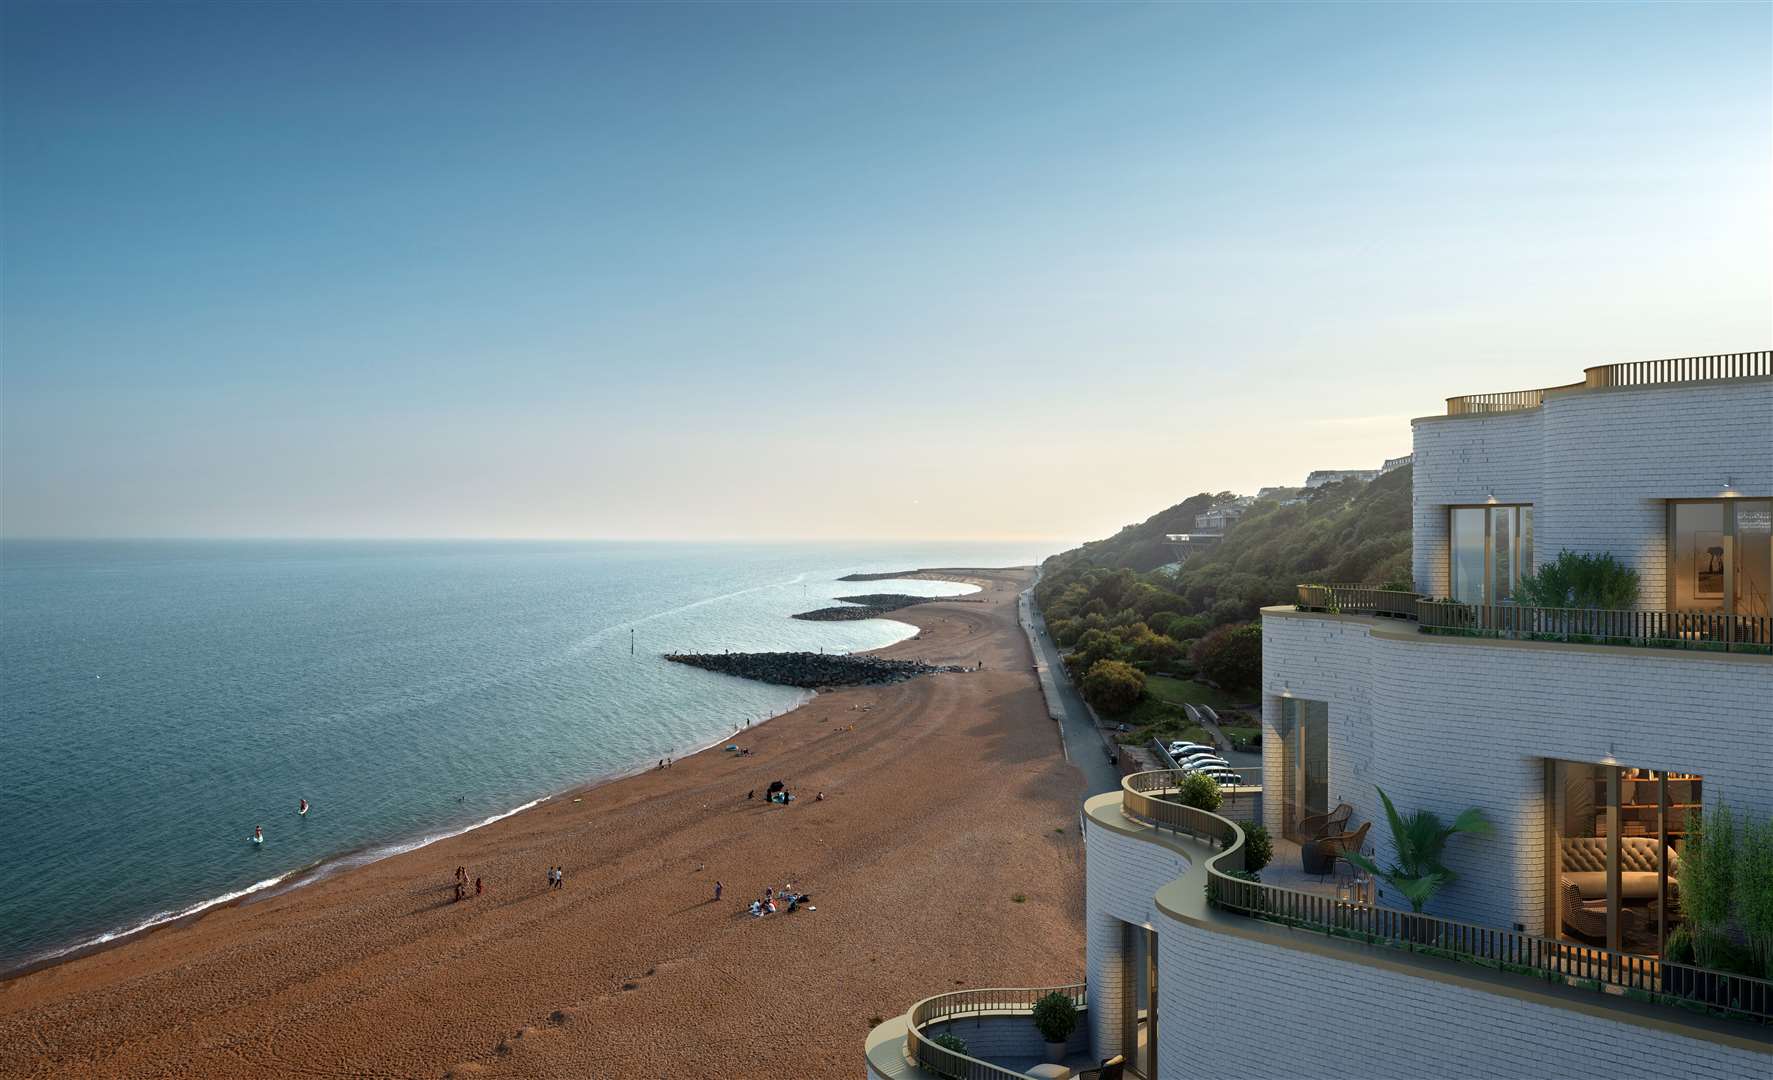 All the Folkestone Shoreline townhouses have roof terraces. Picture: Folkestone Harbour Seafront Development Company